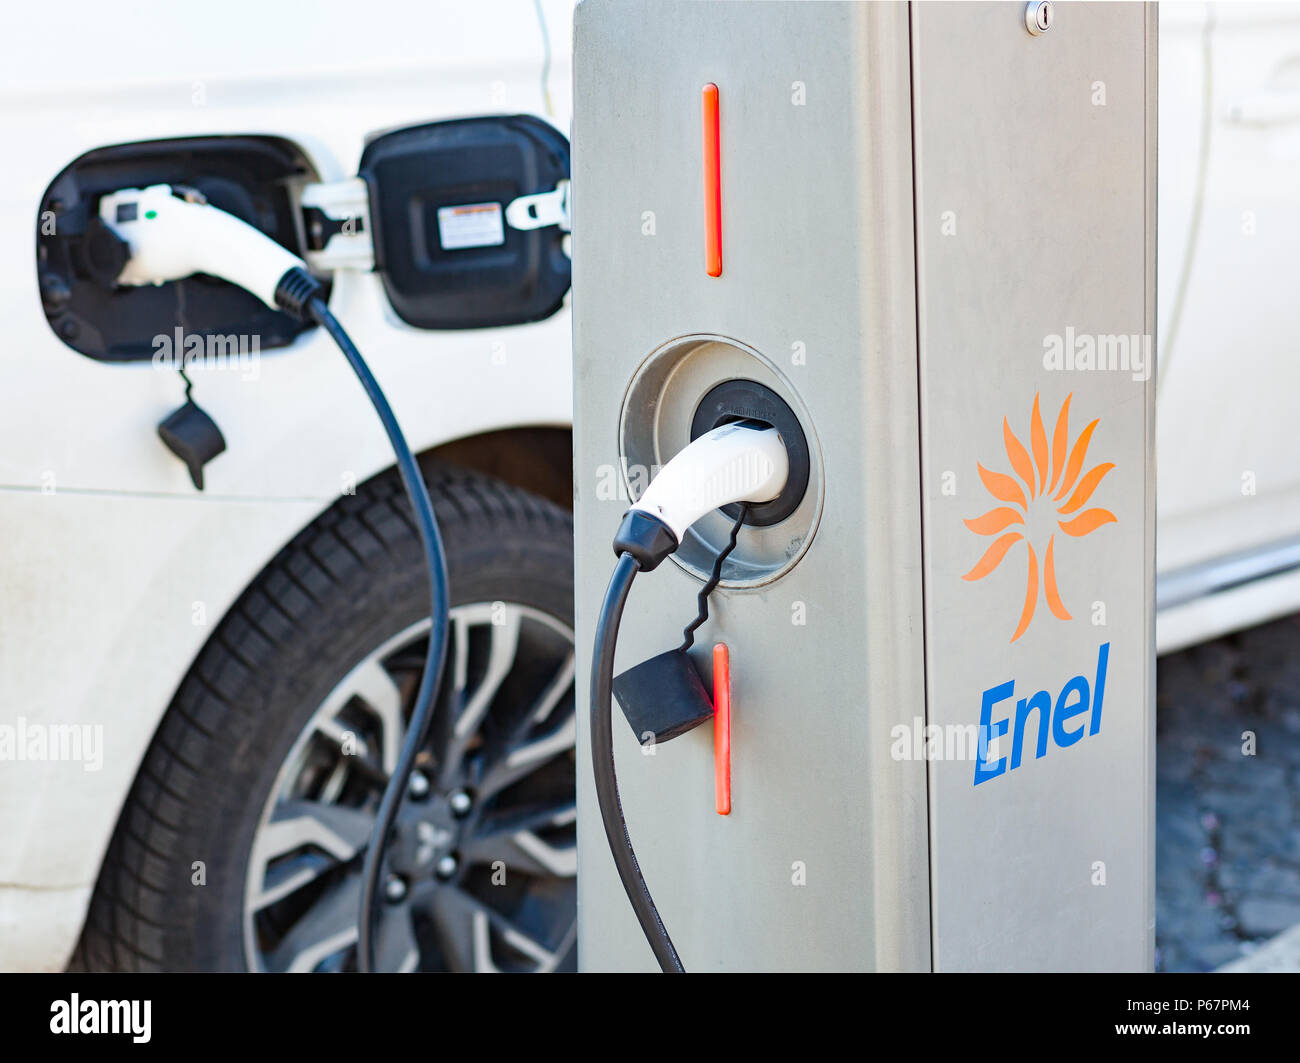 Roma, Italy - February 11, 2018: Enel electric car charger plugged in to the socket.The modern electric car charging the battery. Stock Photo